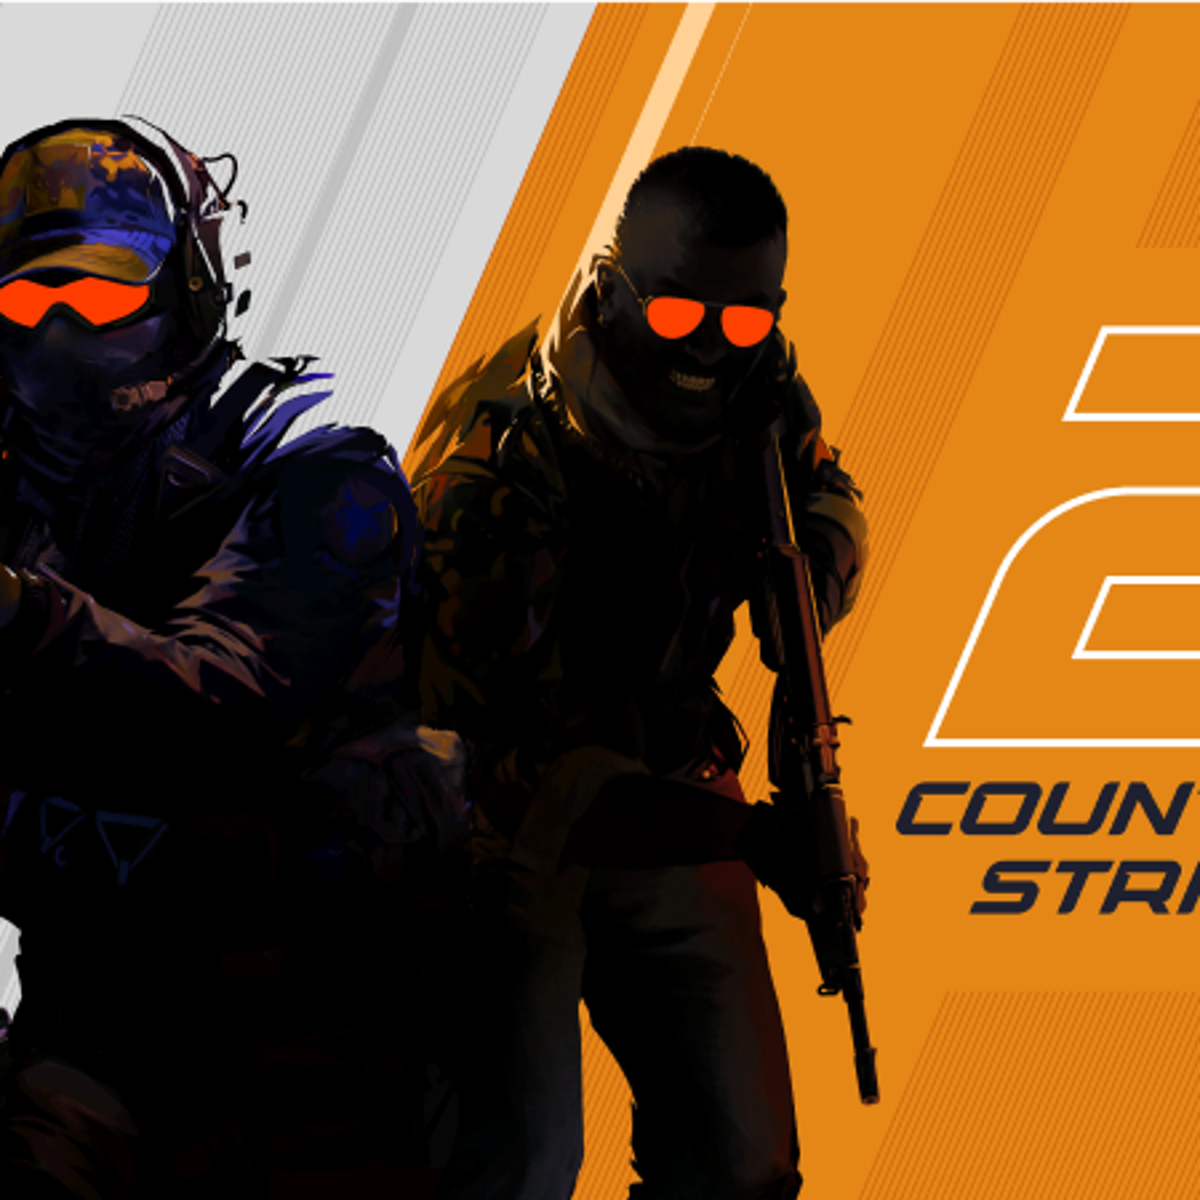 Counter-Strike 2 is live and free-to-play on Steam right now